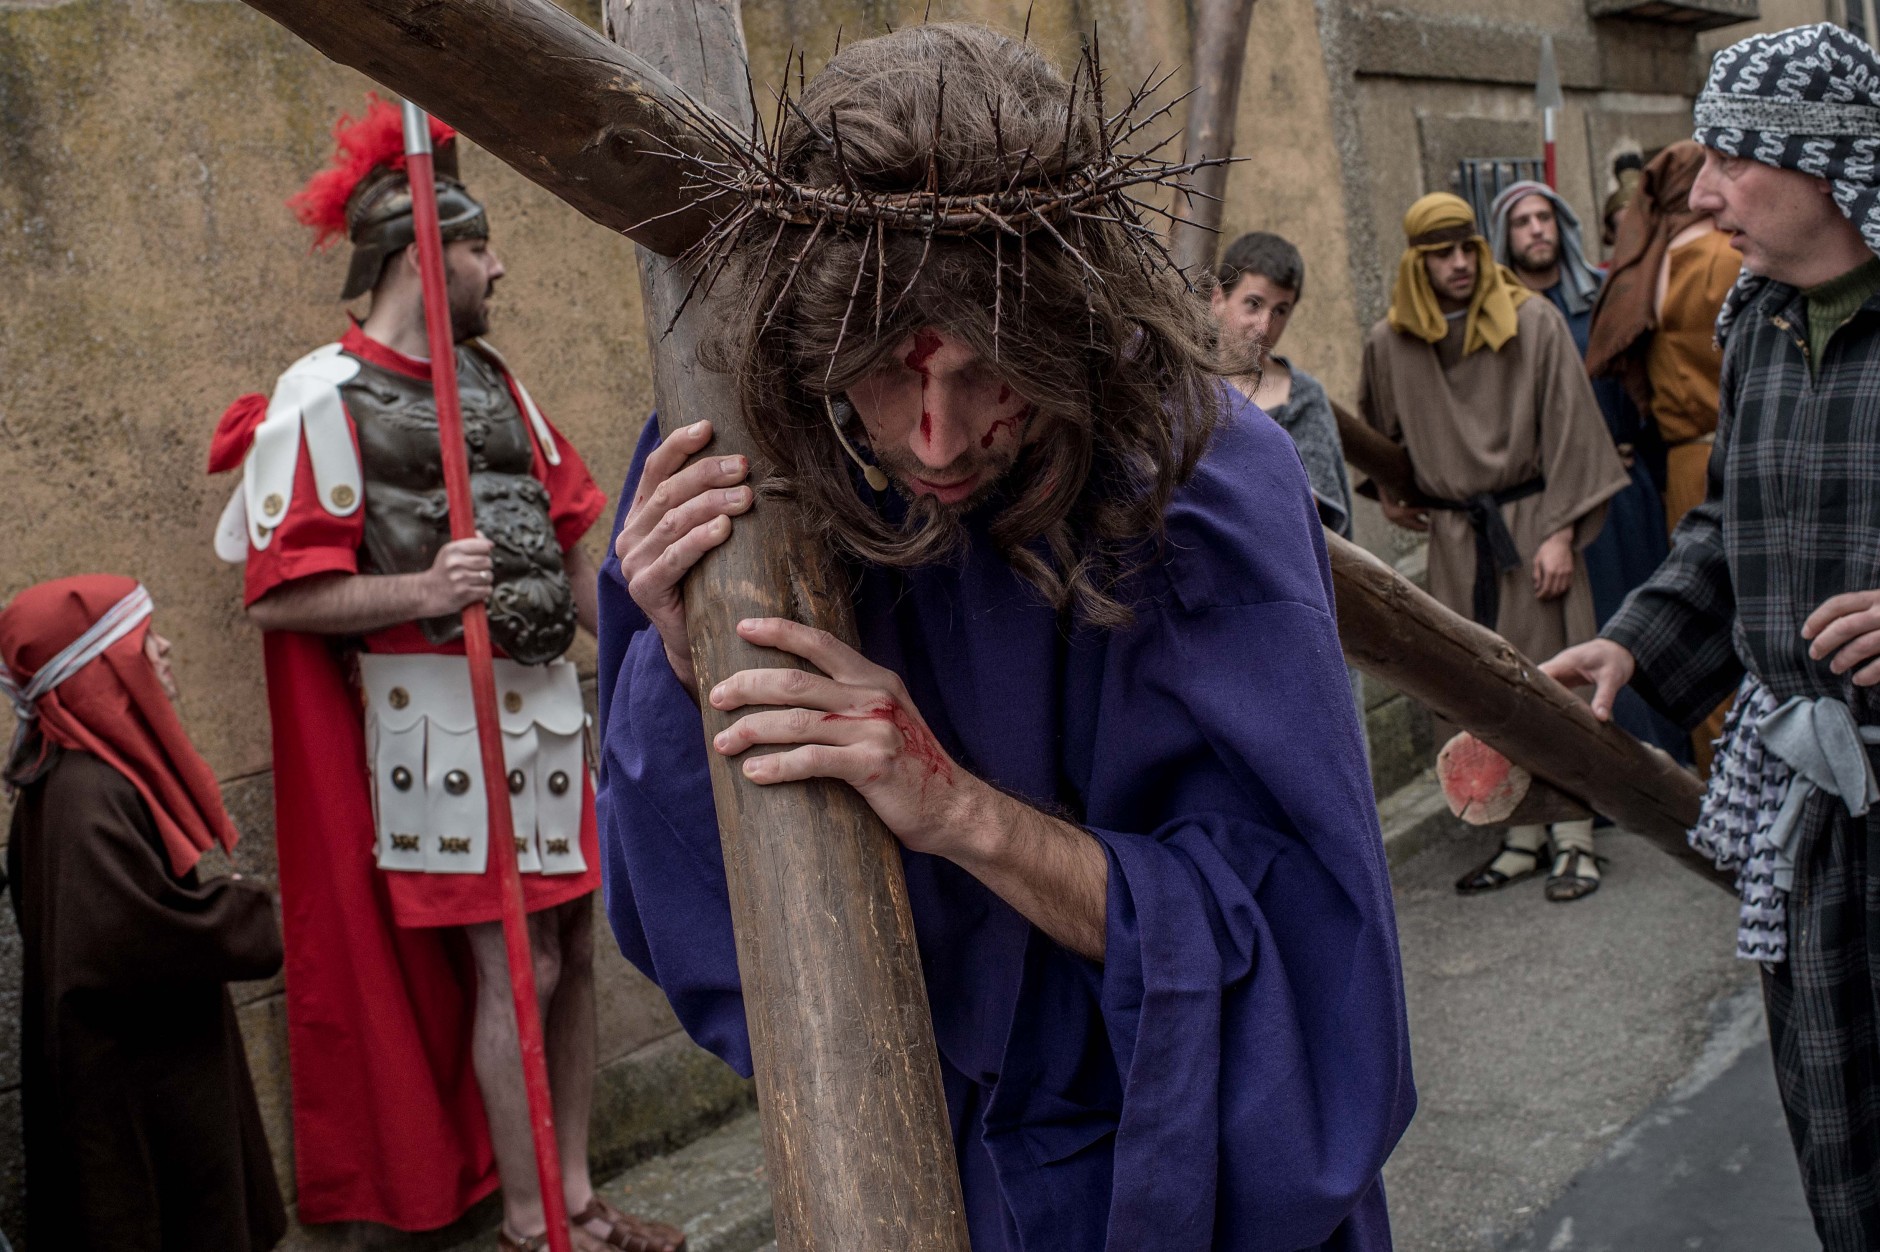 HIENDELAENCINA, SPAIN - MARCH 25:  An actor portrays Jesus Christ as residents of Hiendelaencia gather before starting the reenactment of Christ's suffering on March 25, 2016 in Hiendelaencina, Spain. The 140 village's residents celebrate every year on Good Friday a reenactment of Christ's suffering before being nailed to the cross. Hiendelaencina's inhabitants use their own funds to make the stages and wardrobe. Spain celebrates holy week before Easter with processions in most Spanish towns and villages.  (Photo by David Ramos/Getty Images)